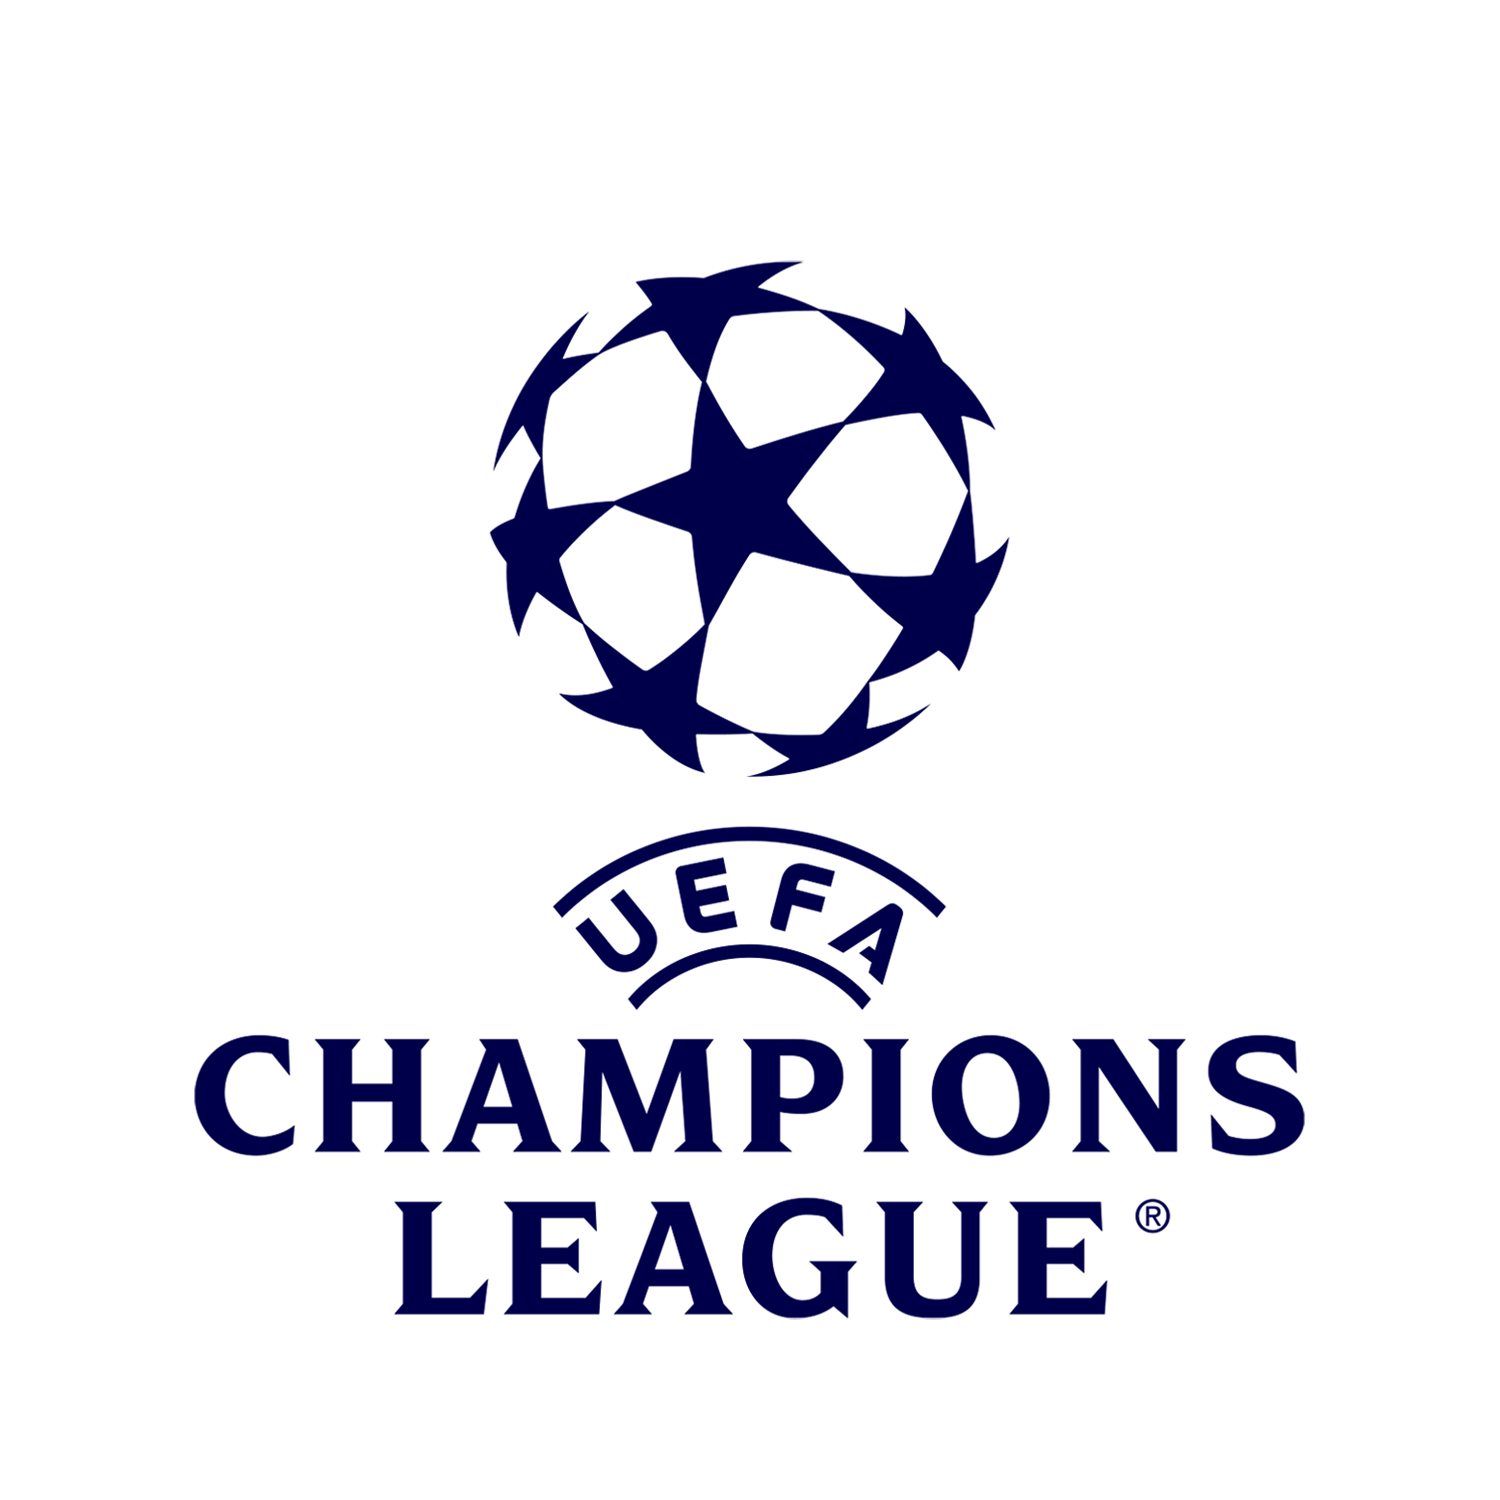 UEFA Champions League Coins & Medals